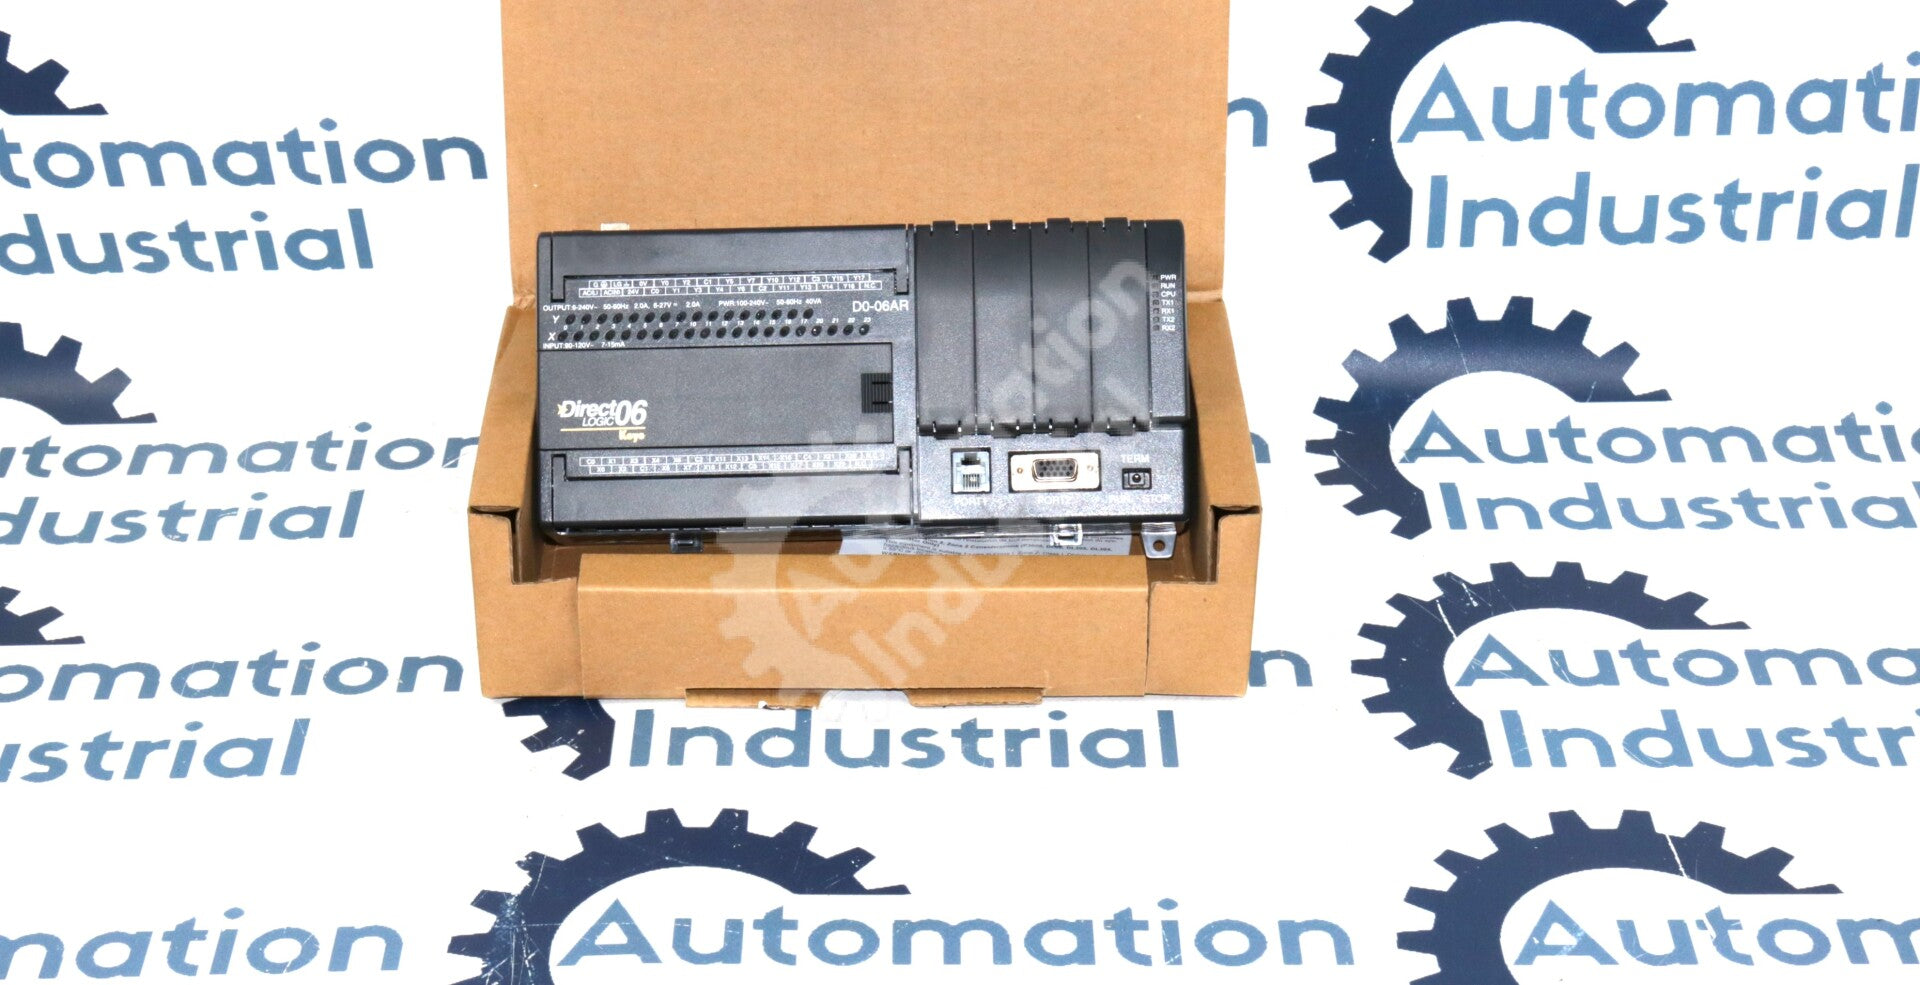 D0-06AR By Automation Direct I/O Module DL06 NSFP DirectLOGIC 06